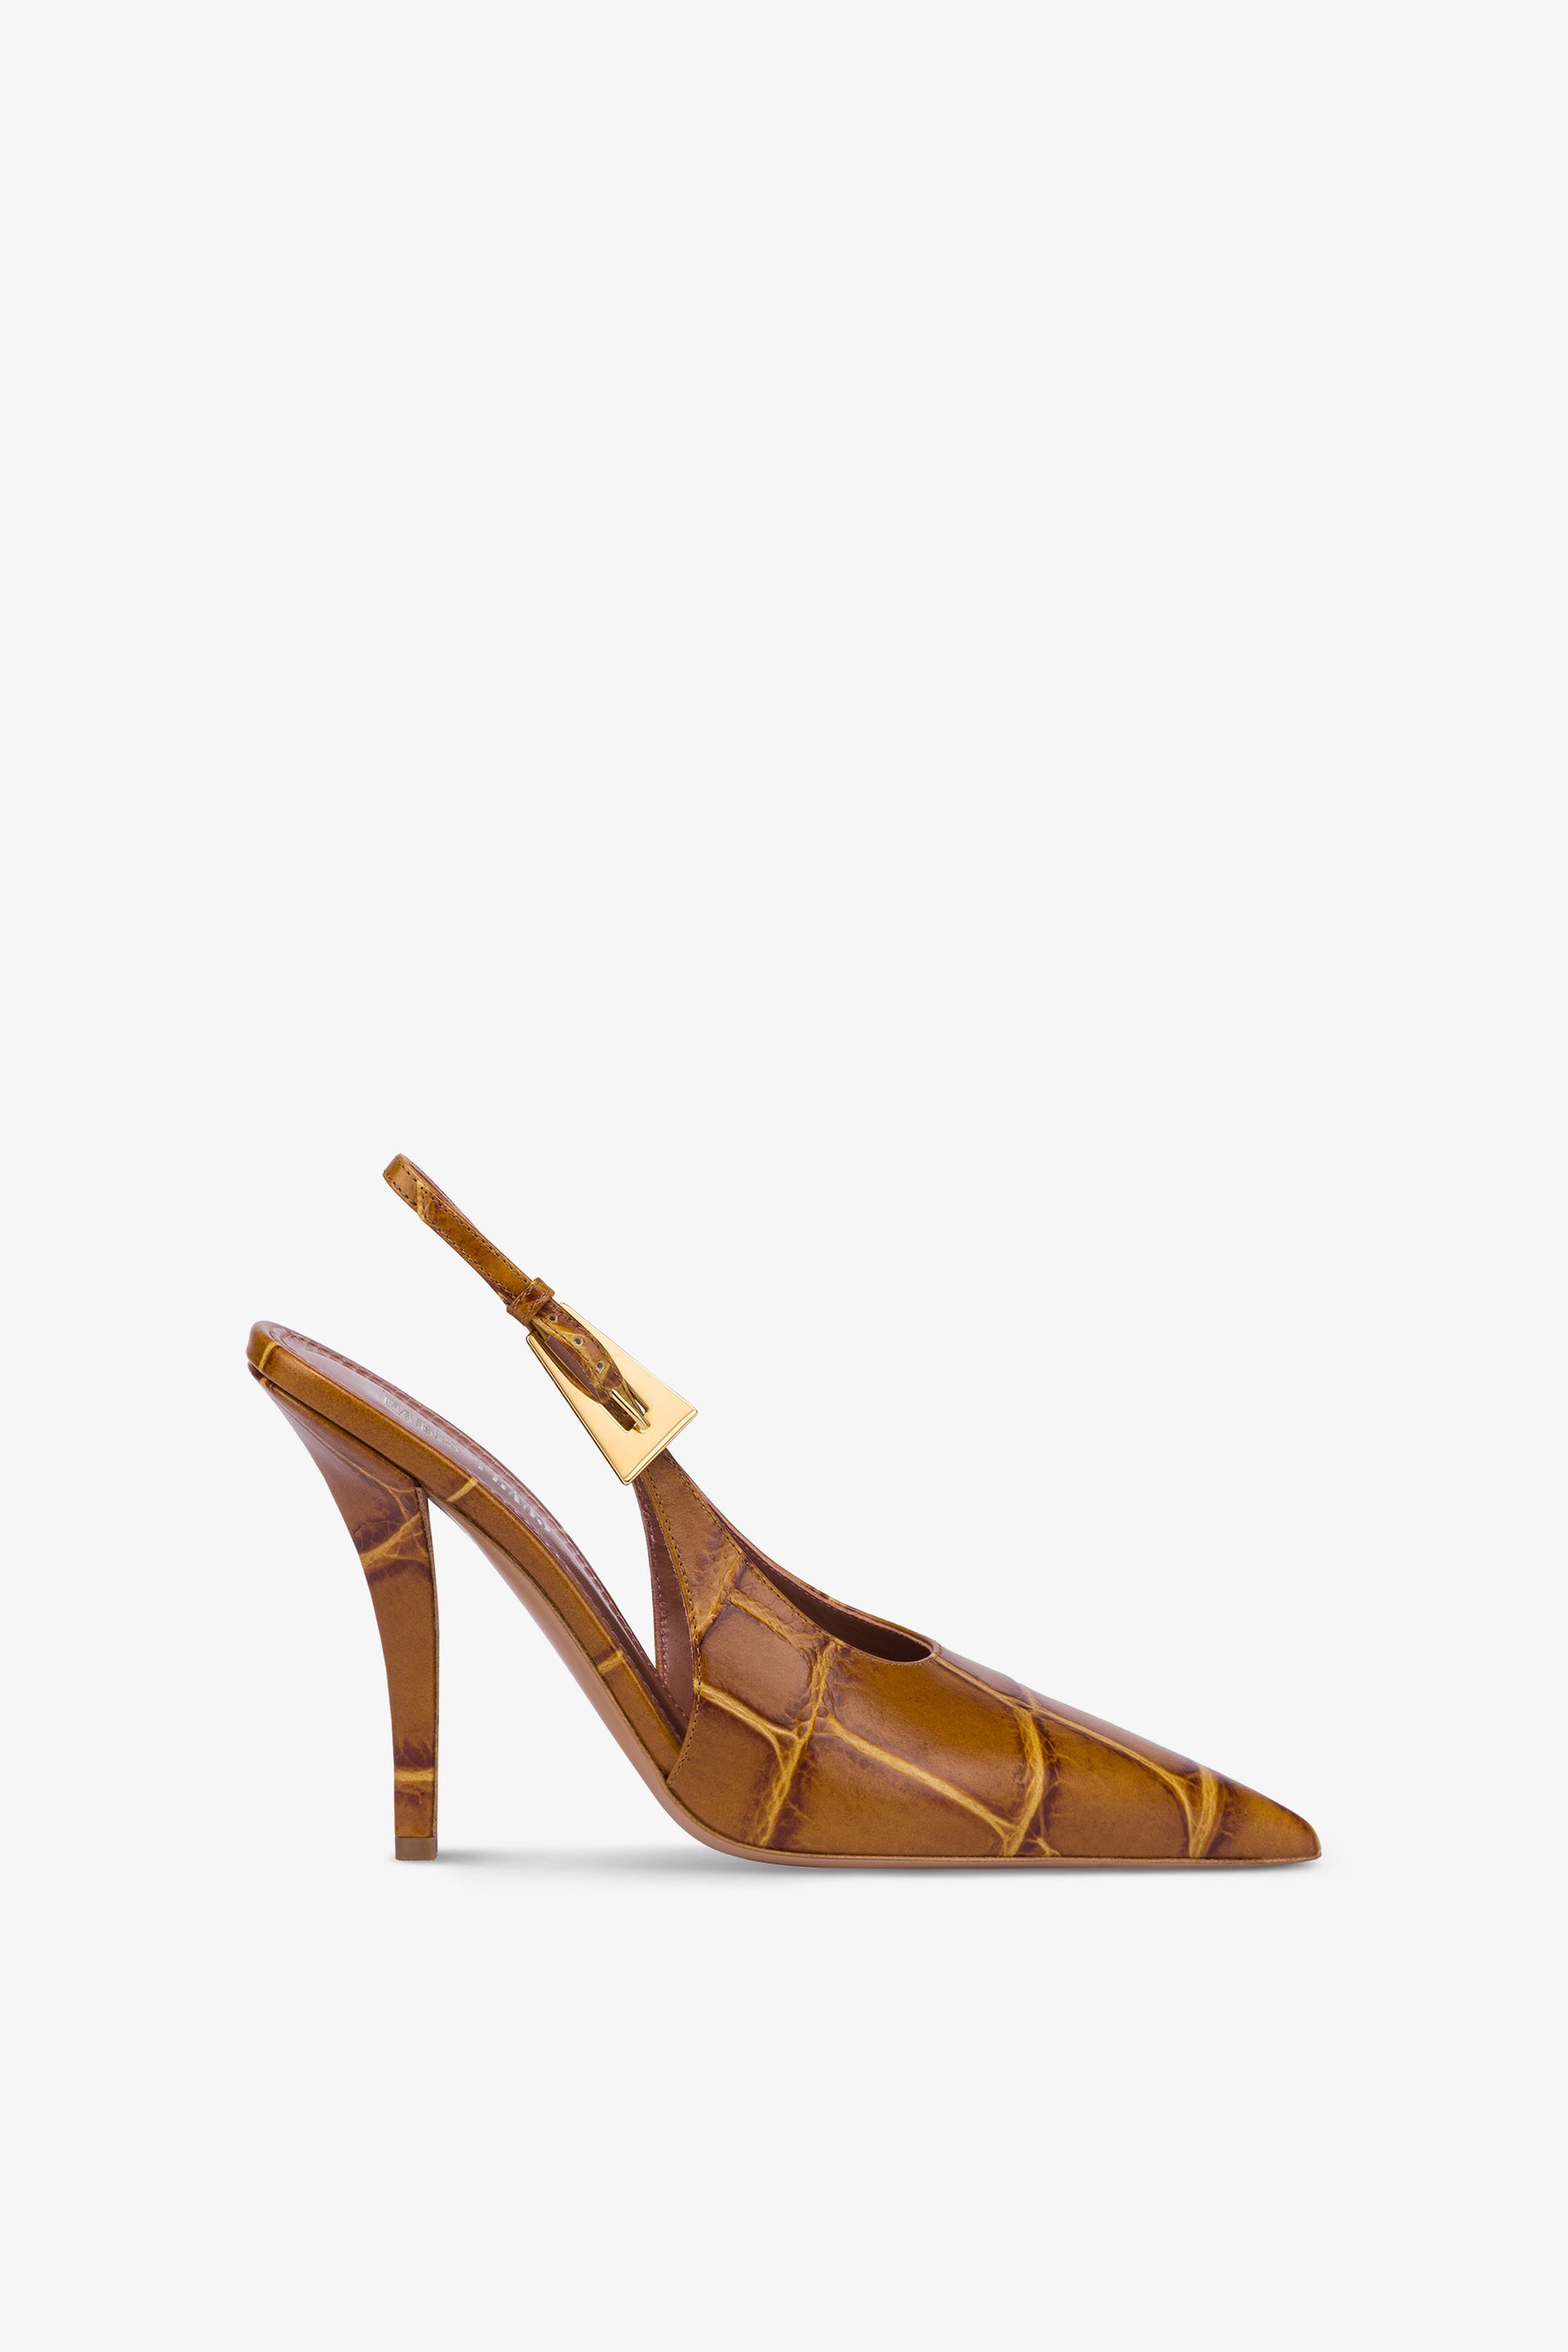 Sharp, pointed slingback pumps in capim soft croco-embossed leather